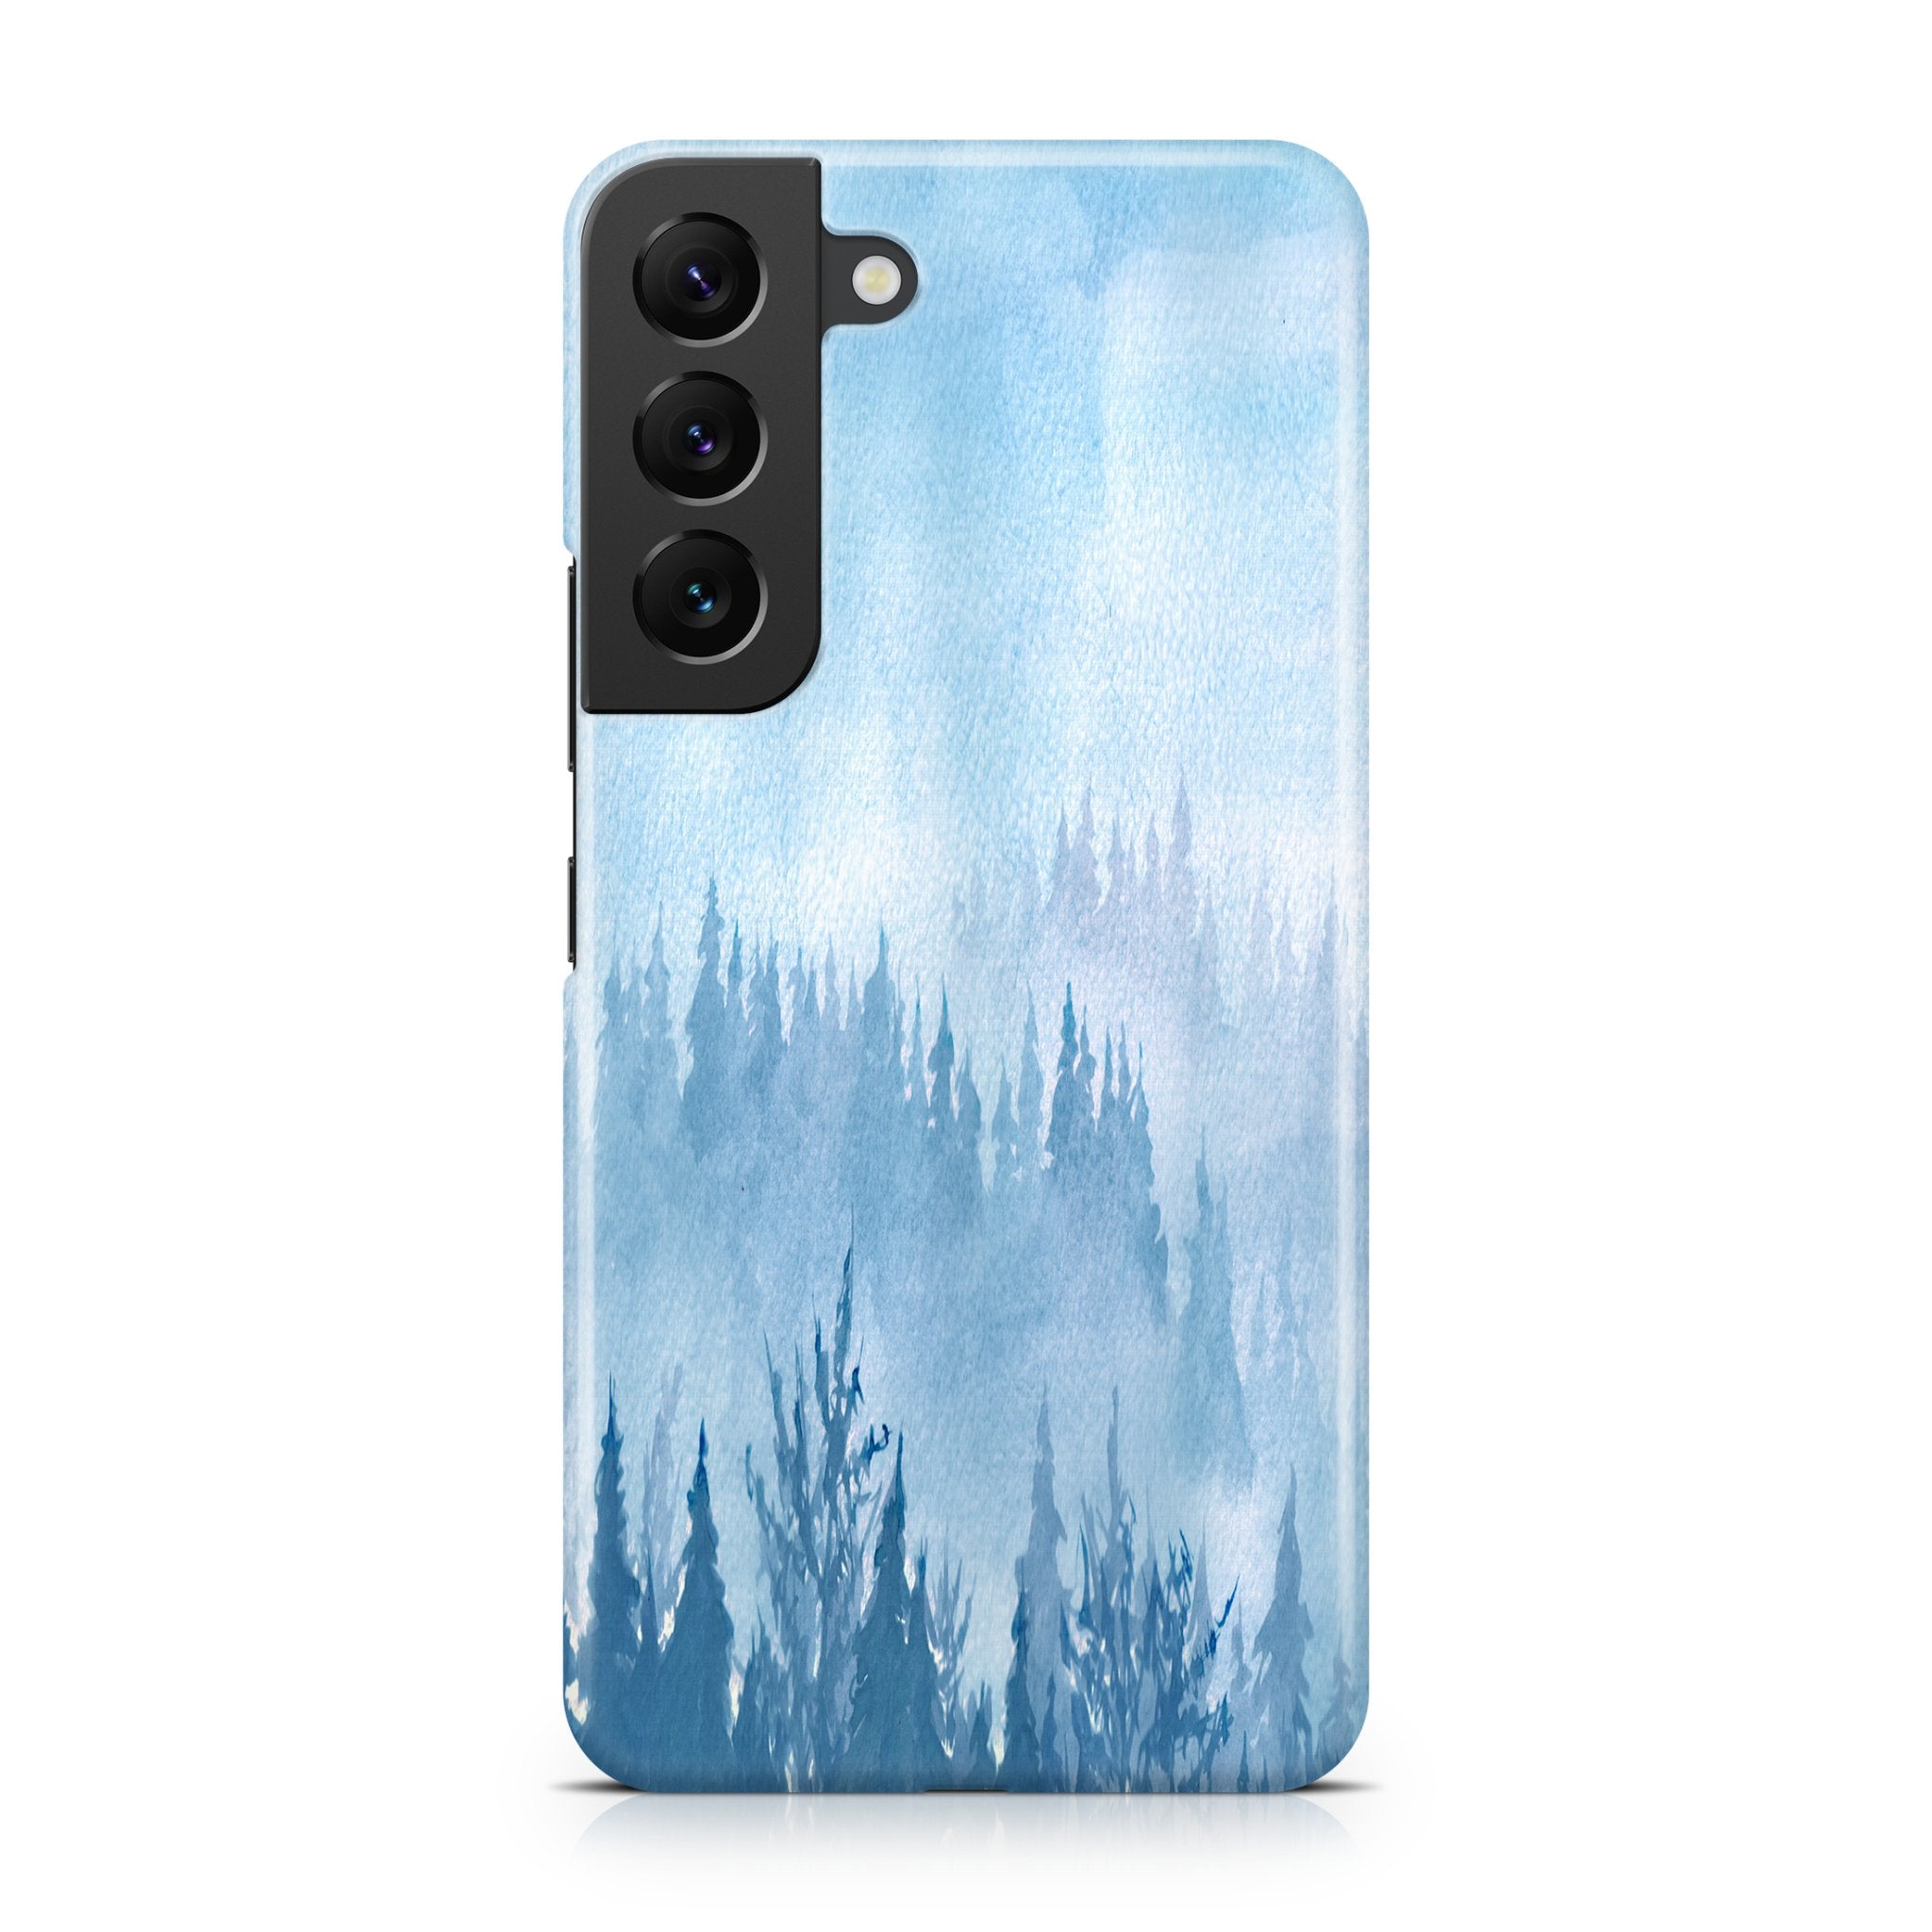 Foggy Blue - Samsung phone case designs by CaseSwagger